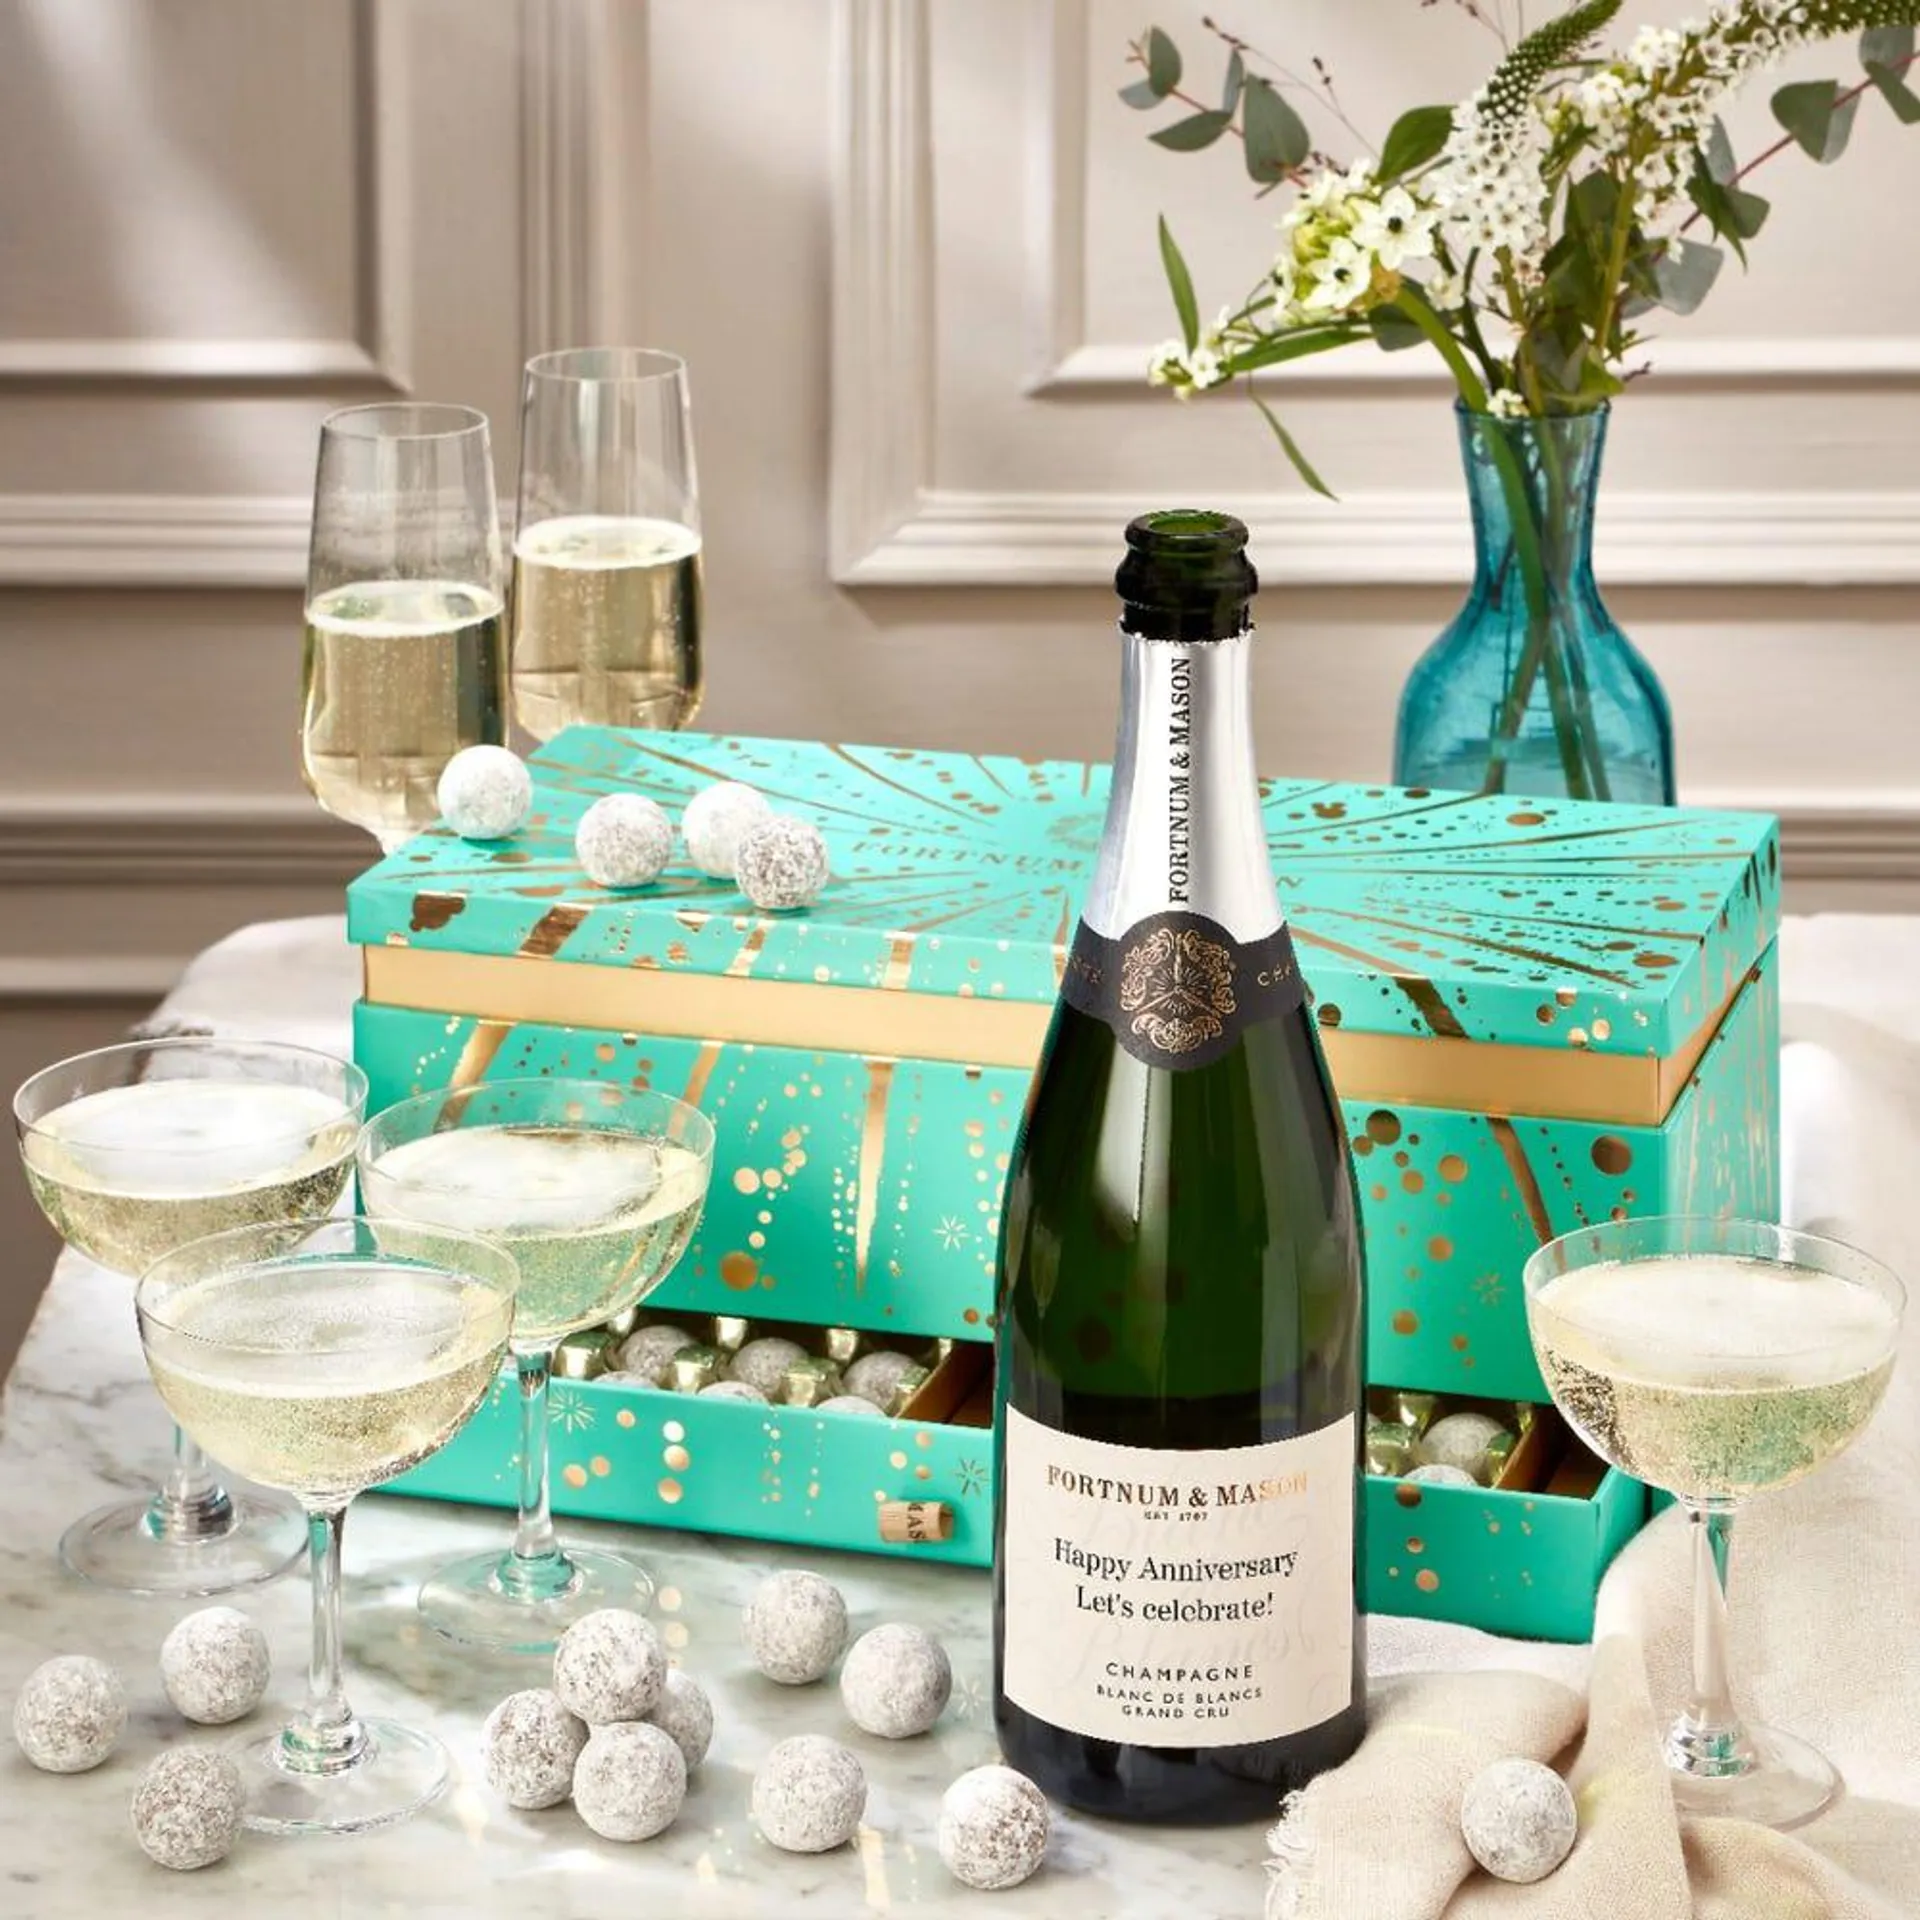 The Personalised Champagne & Chocolate Gift Box